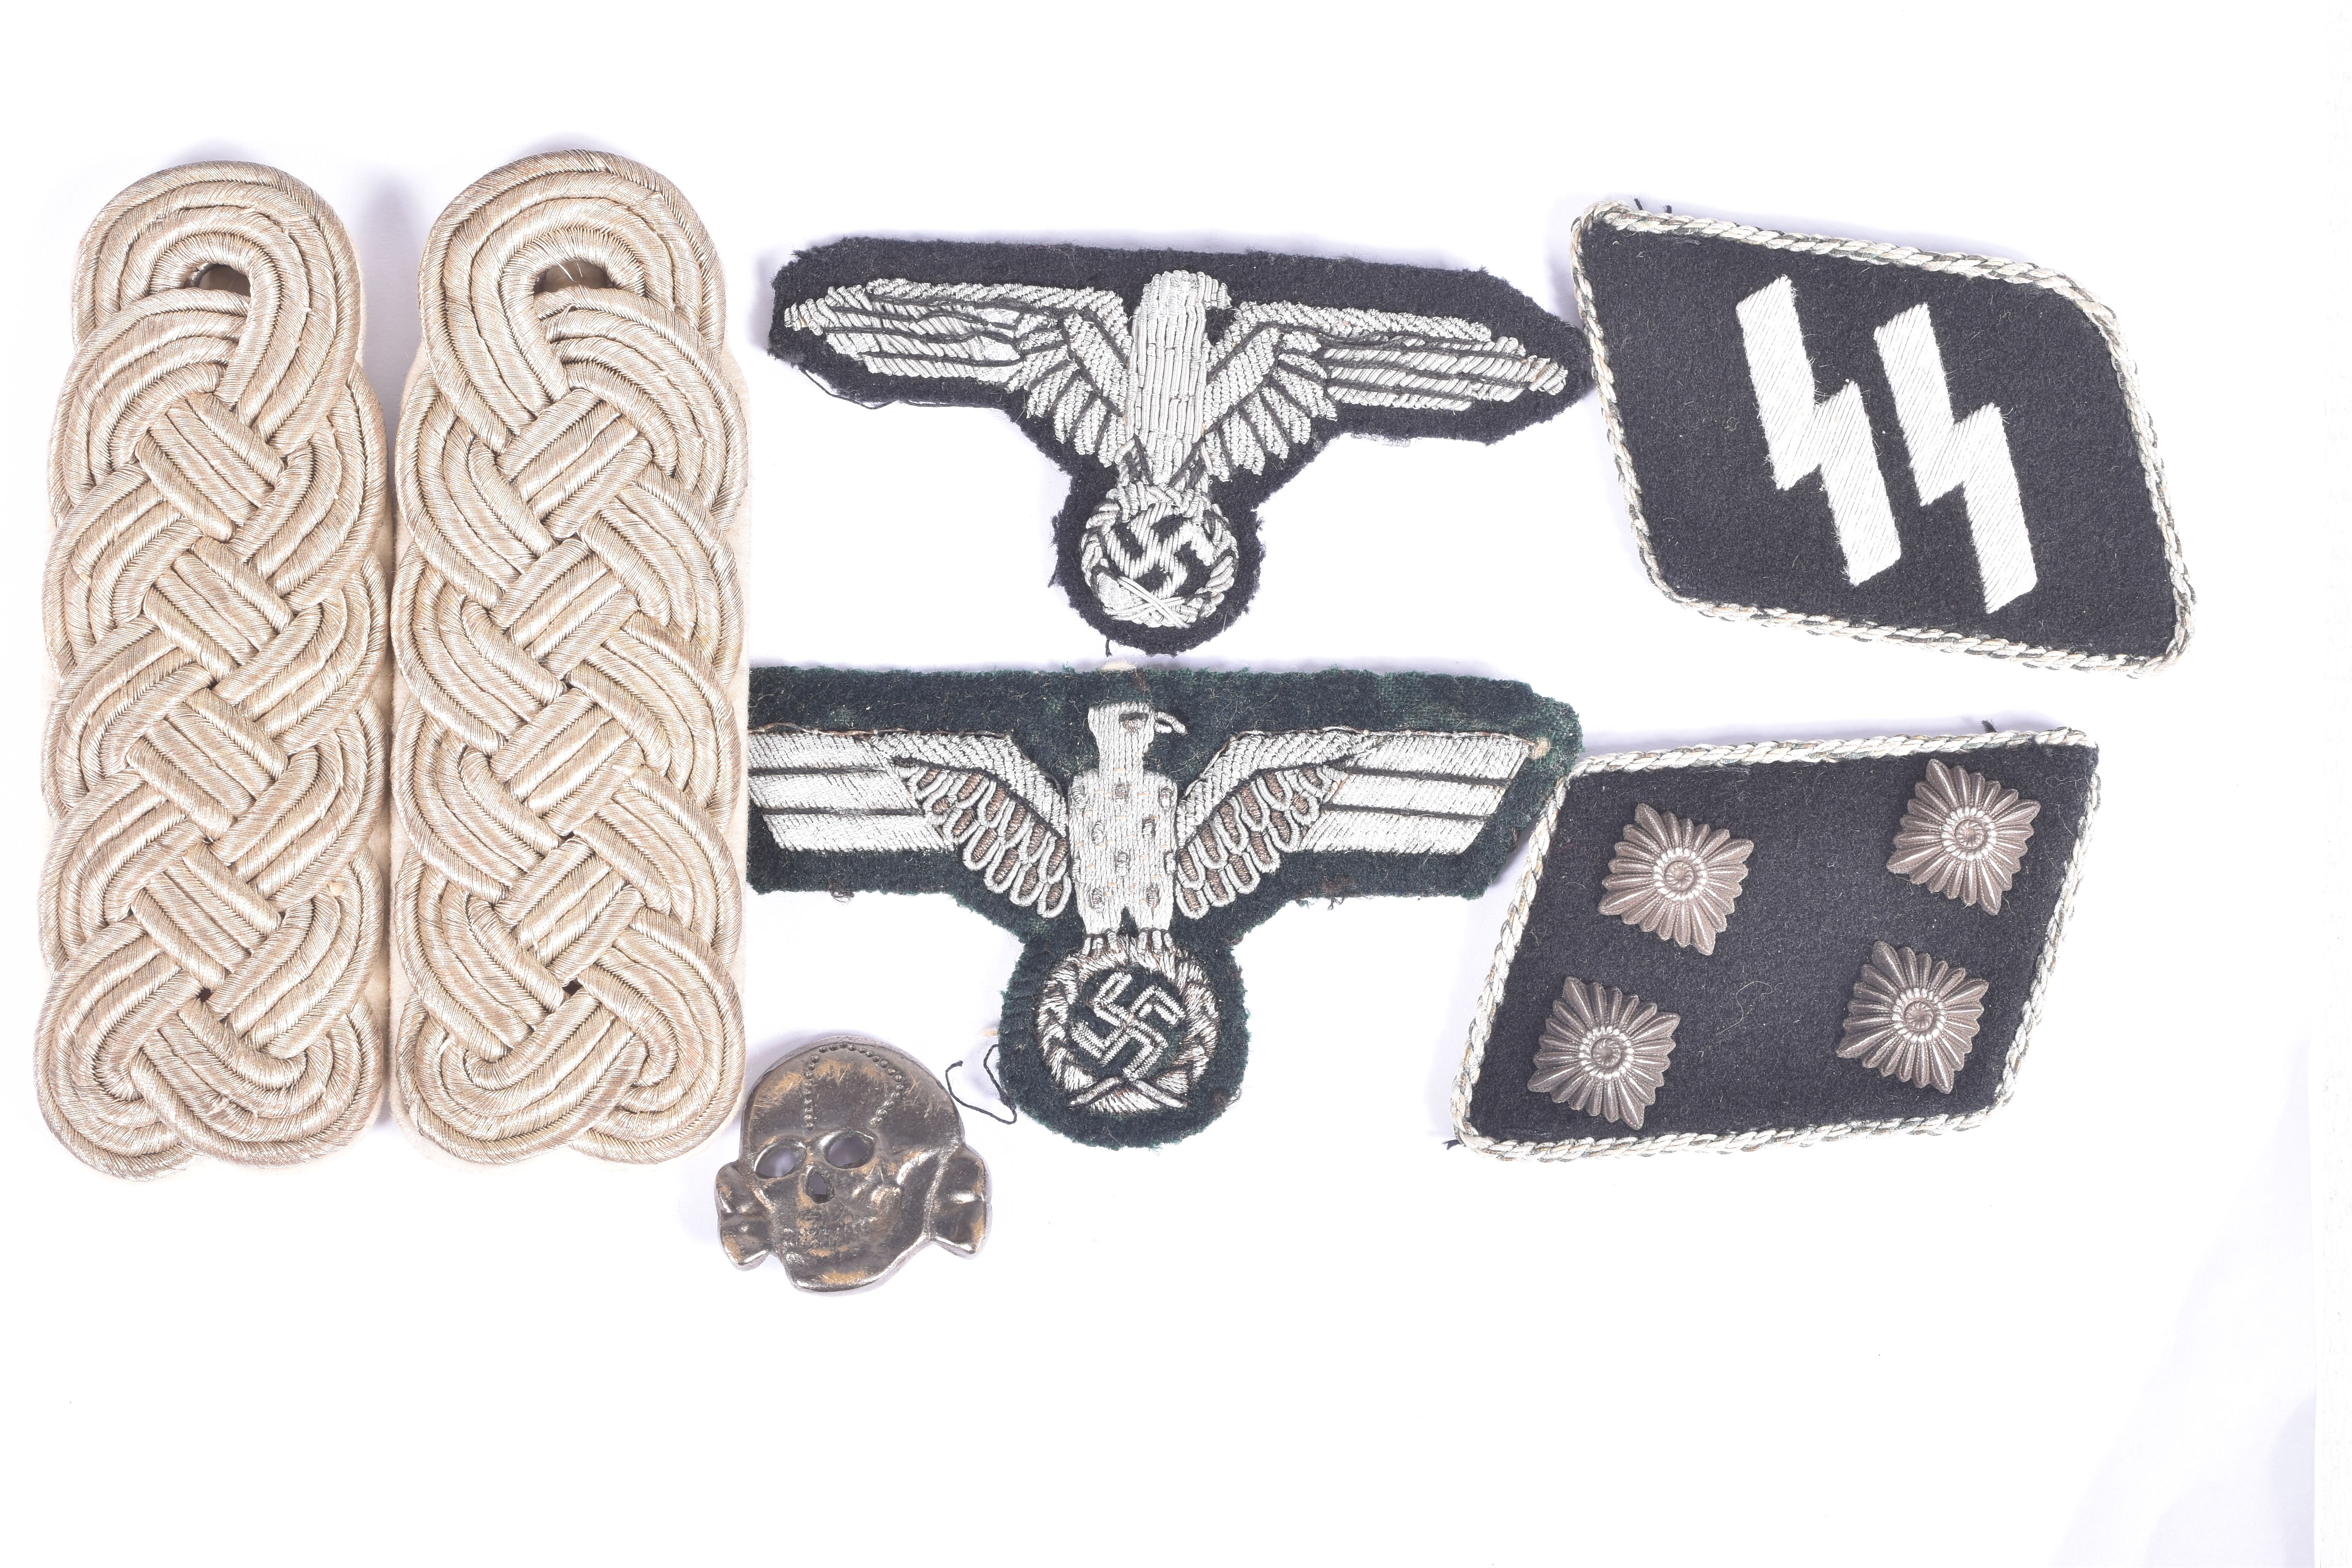 A SMALL COLLECTION OF GERMAN UNIFORM RELATED ITEMS, to include breast eagles, shoulder boards,